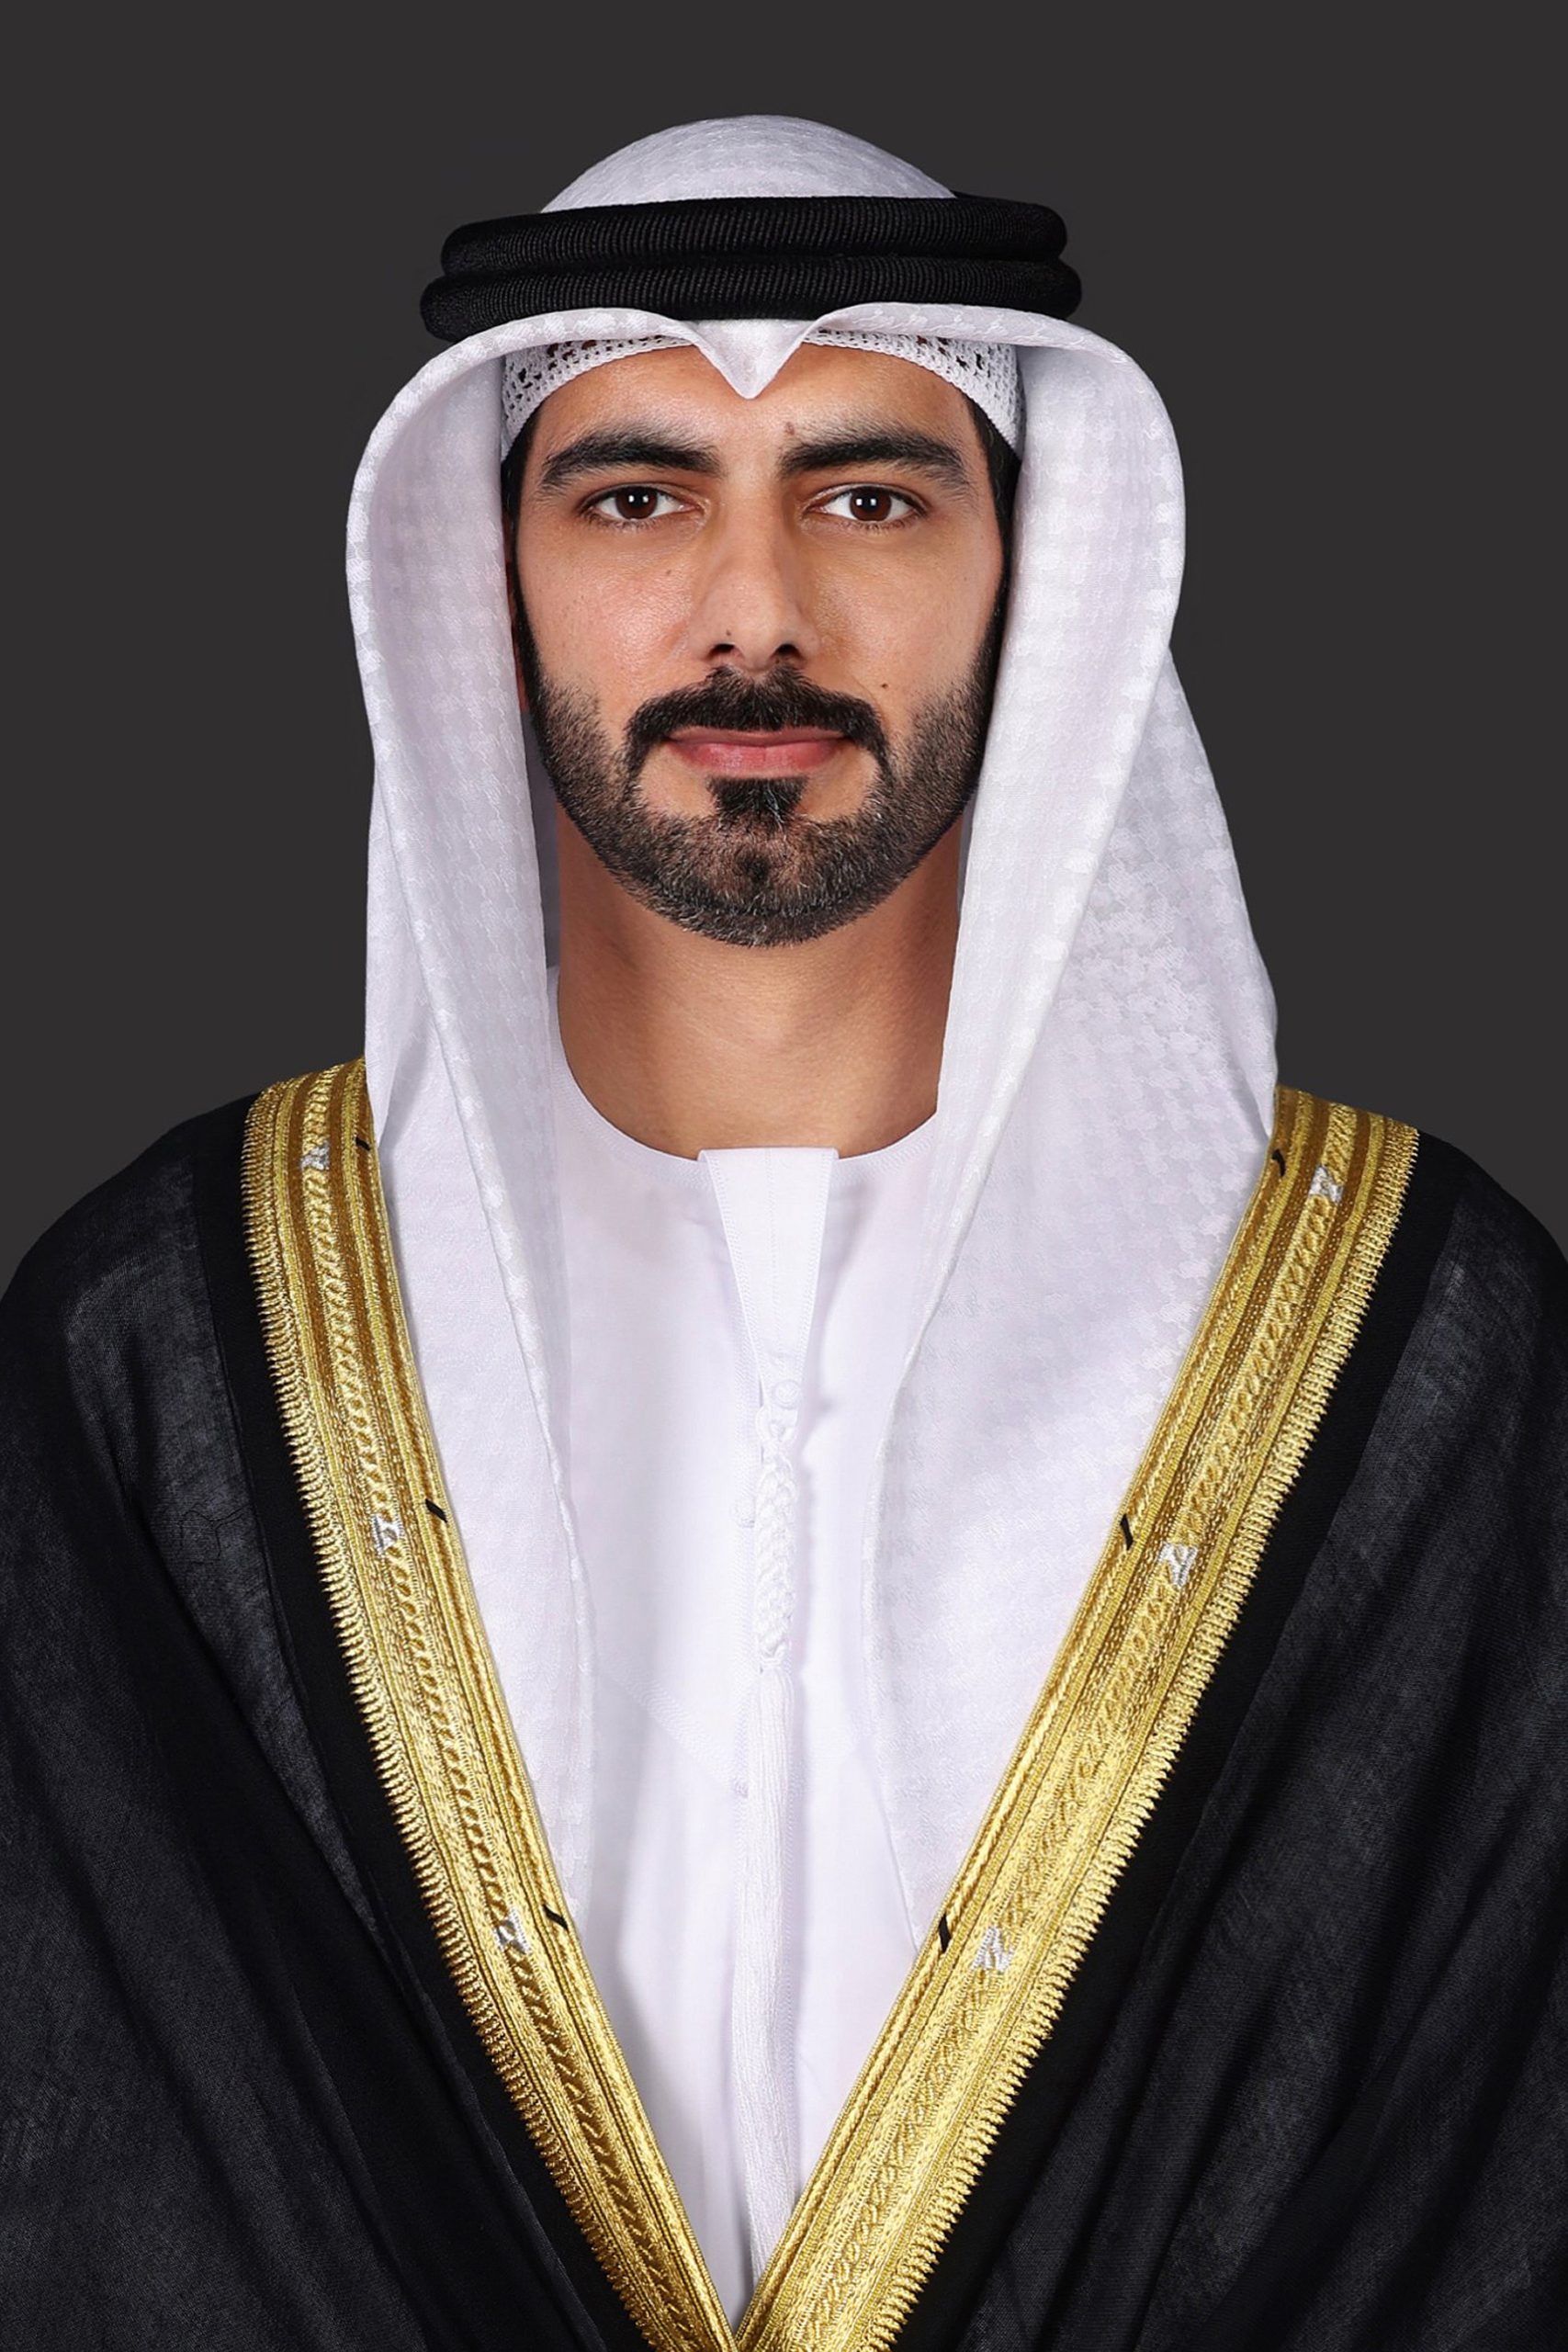 Statement by His Excellency Salem bin Khalid Al Qassimi, Minister of Culture and Youth, on the occasion of the 47th anniversary of the unification of the UAE Armed Forces